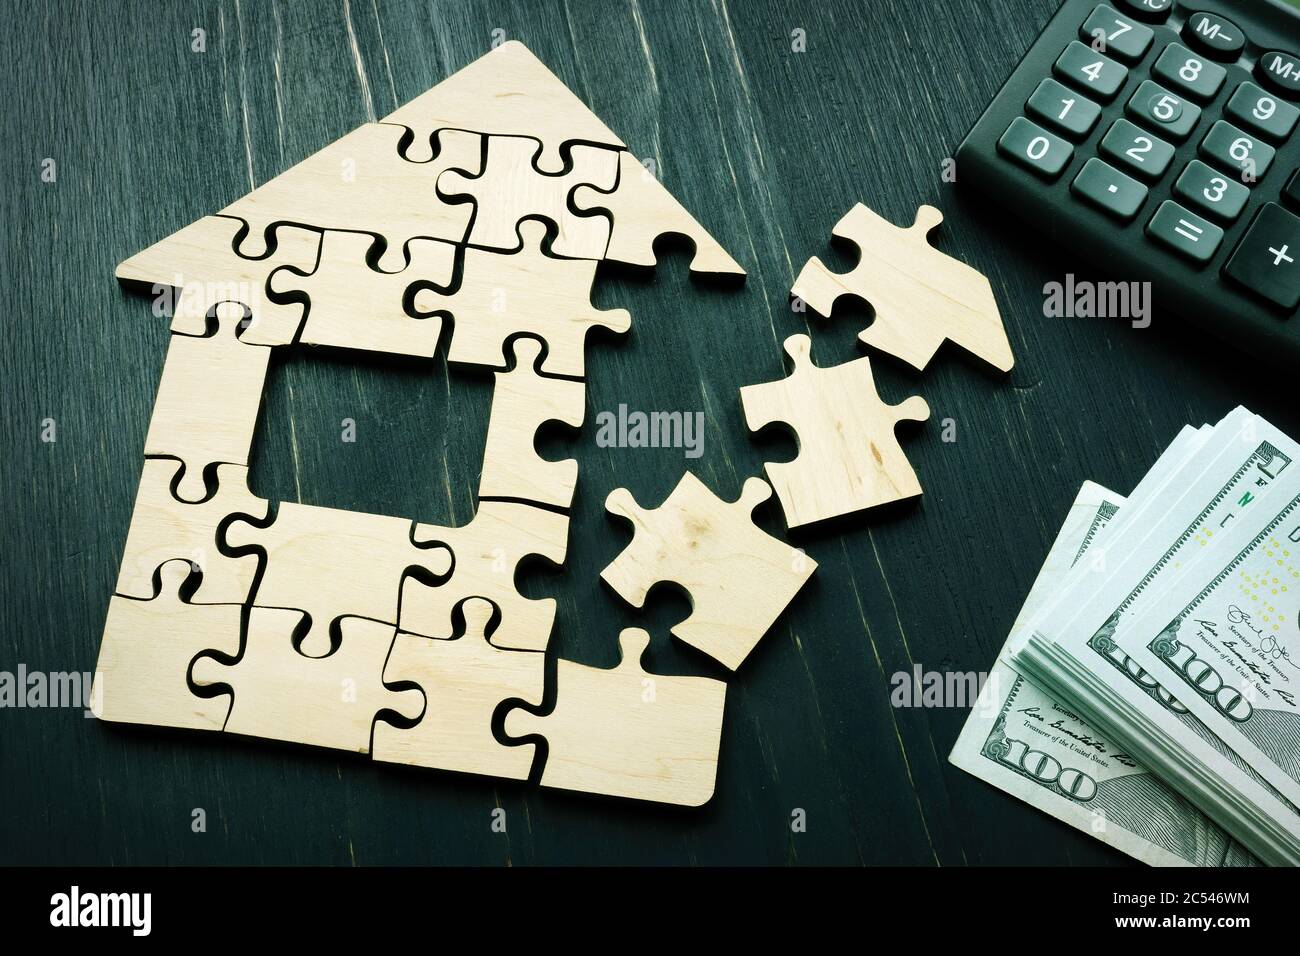 Mortgage concept. House shape from puzzle pieces and money. Stock Photo